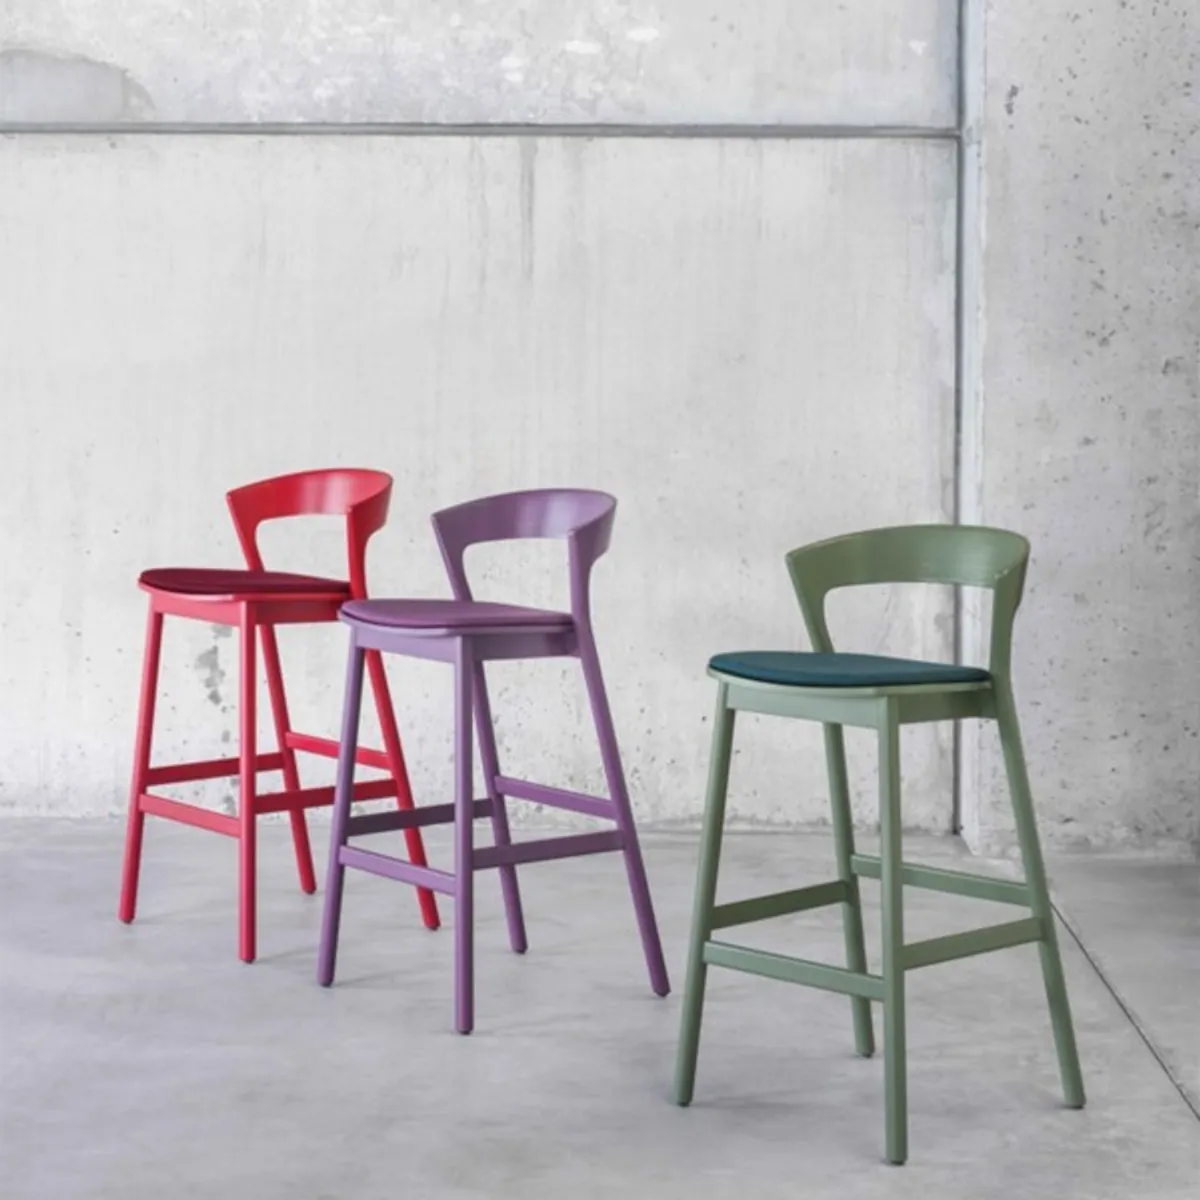 Thora soft bar stool Inside Out Contracts5